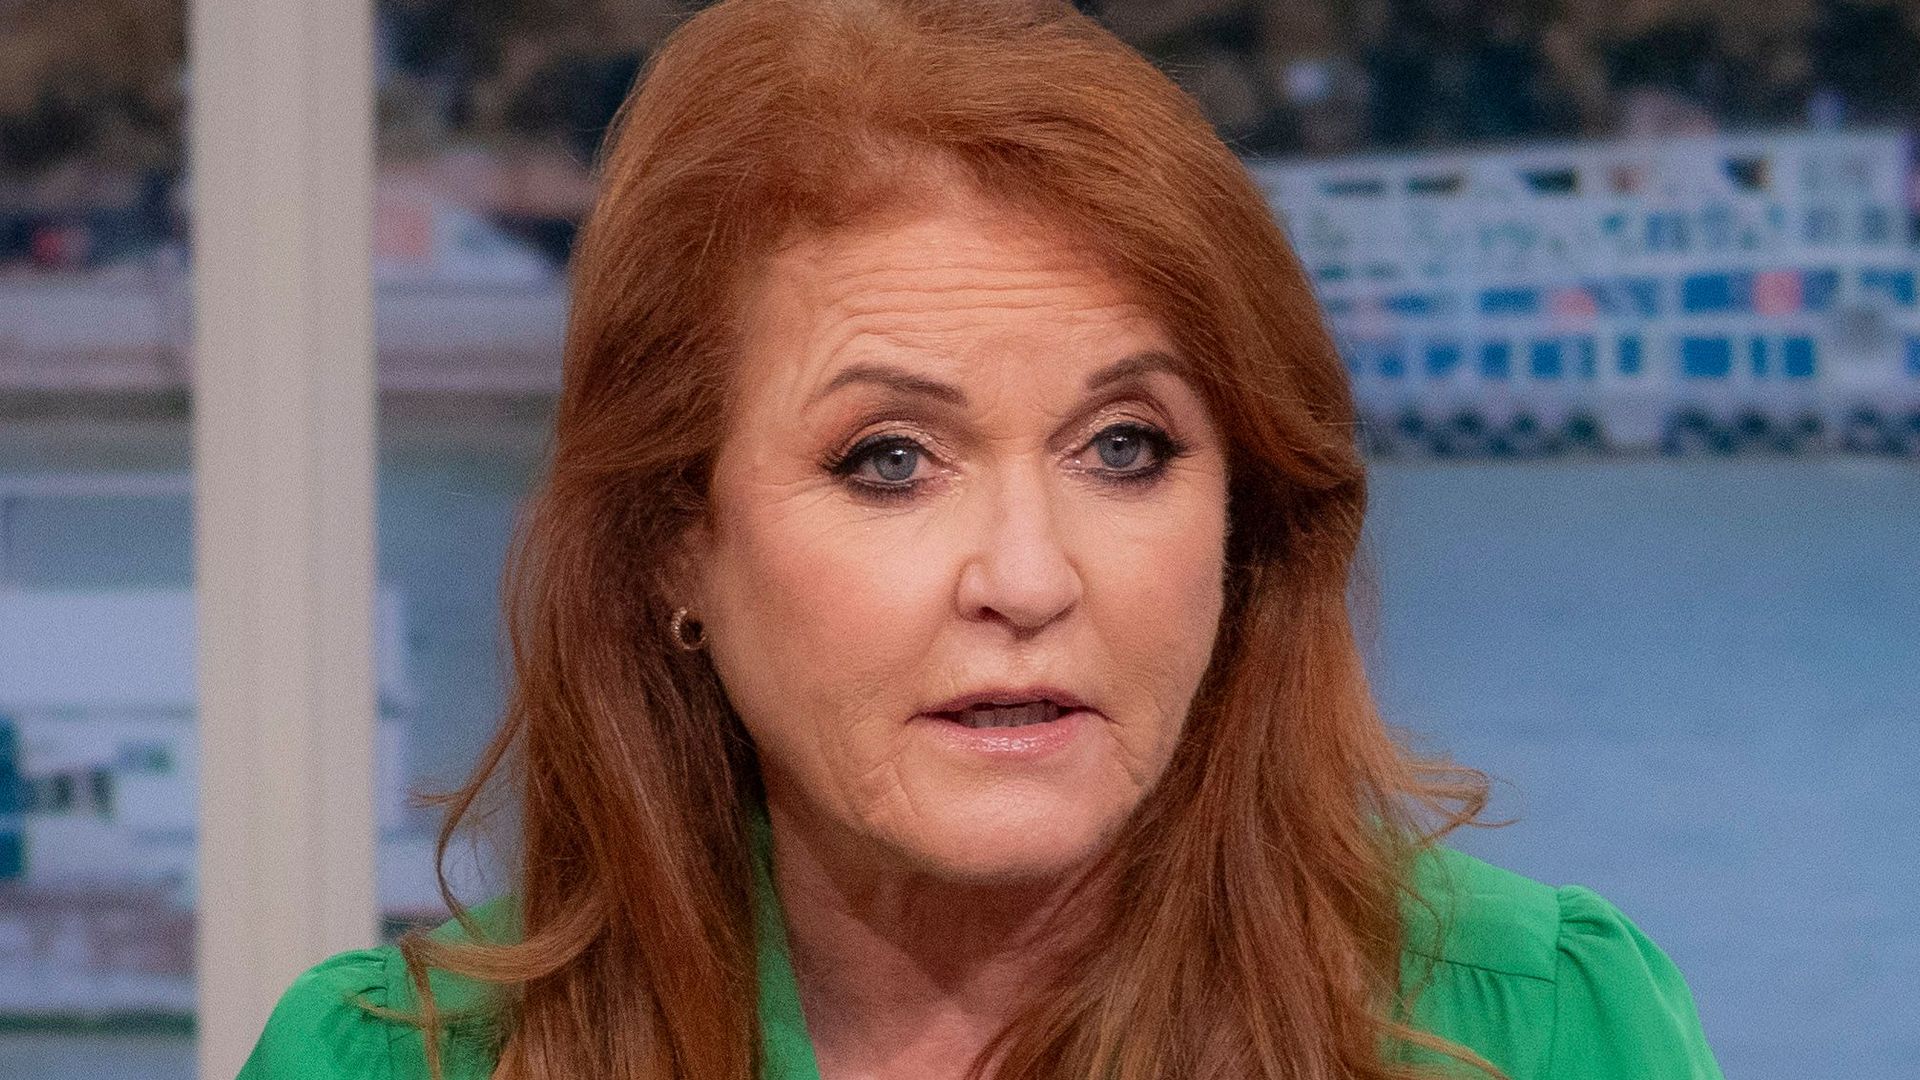 Sarah Ferguson tears up in emotional comment about daughters Beatrice and Eugenie during Prince Andrew divorce